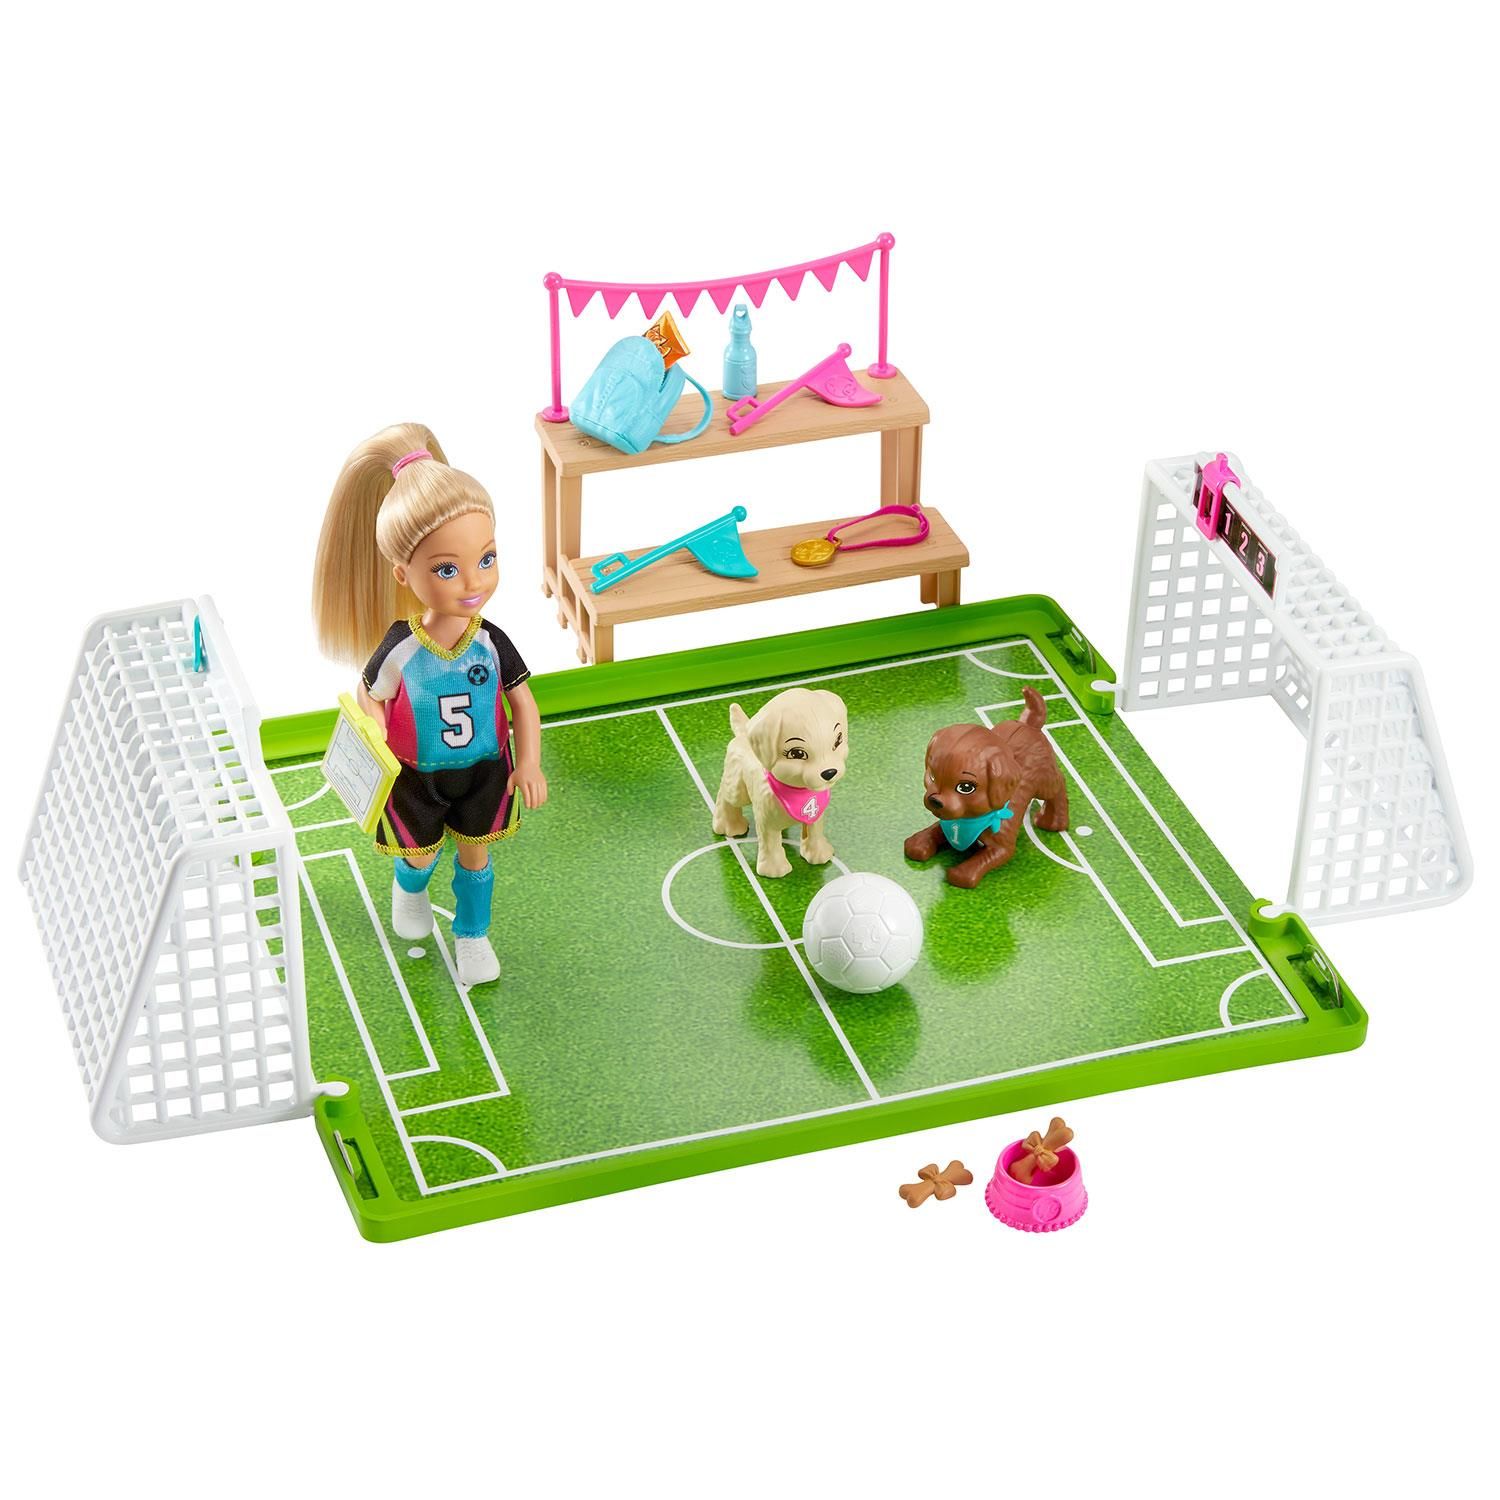 Young imaginations can play out so many sports stories with the Chelsea doll, inspired by Barbie Dreamhouse Adventures, and her soccer playset.


Two goals, each with an adjustable scoring board, attach to a field area where Chelsea can practice and play -- press down on her shoulders for 